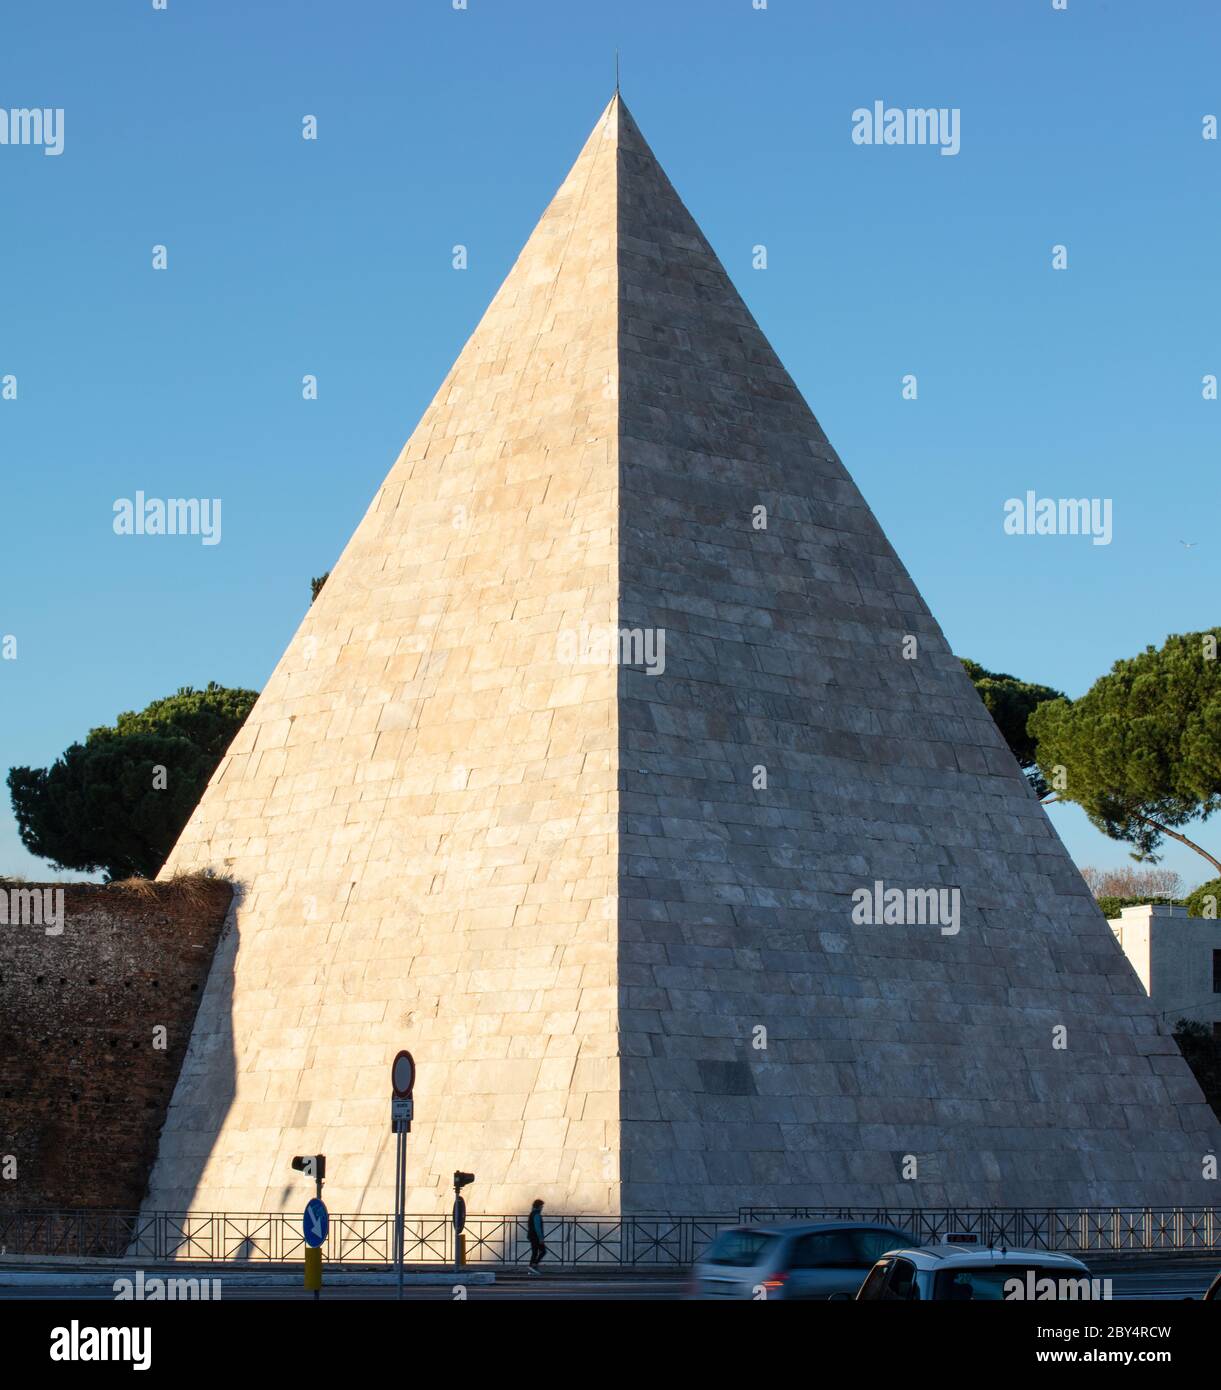 Pyramid of Gaius Cestius, in Piramide, in the evening light. Originally a tomb for a wealthy Roman it was later incorporated into the Aurelian Walls. Stock Photo